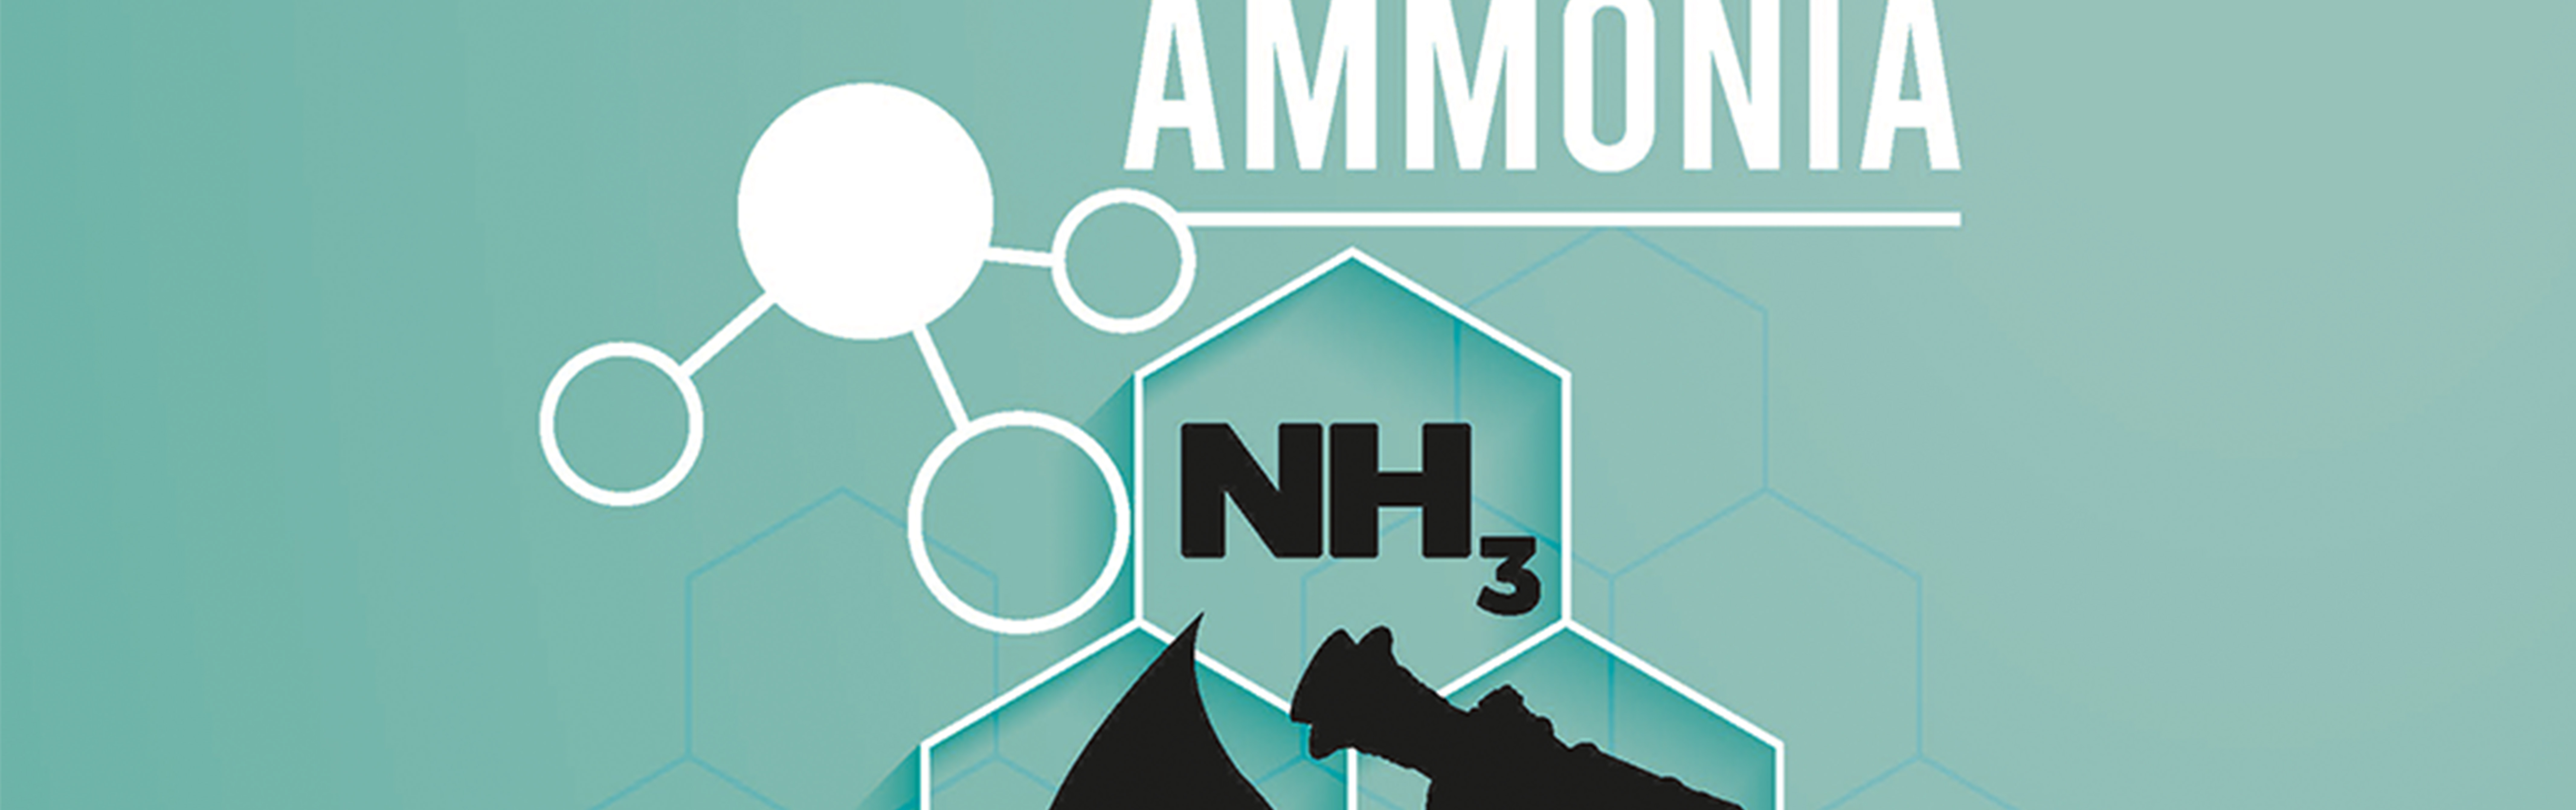 Ammonia for valuable clean energy systems